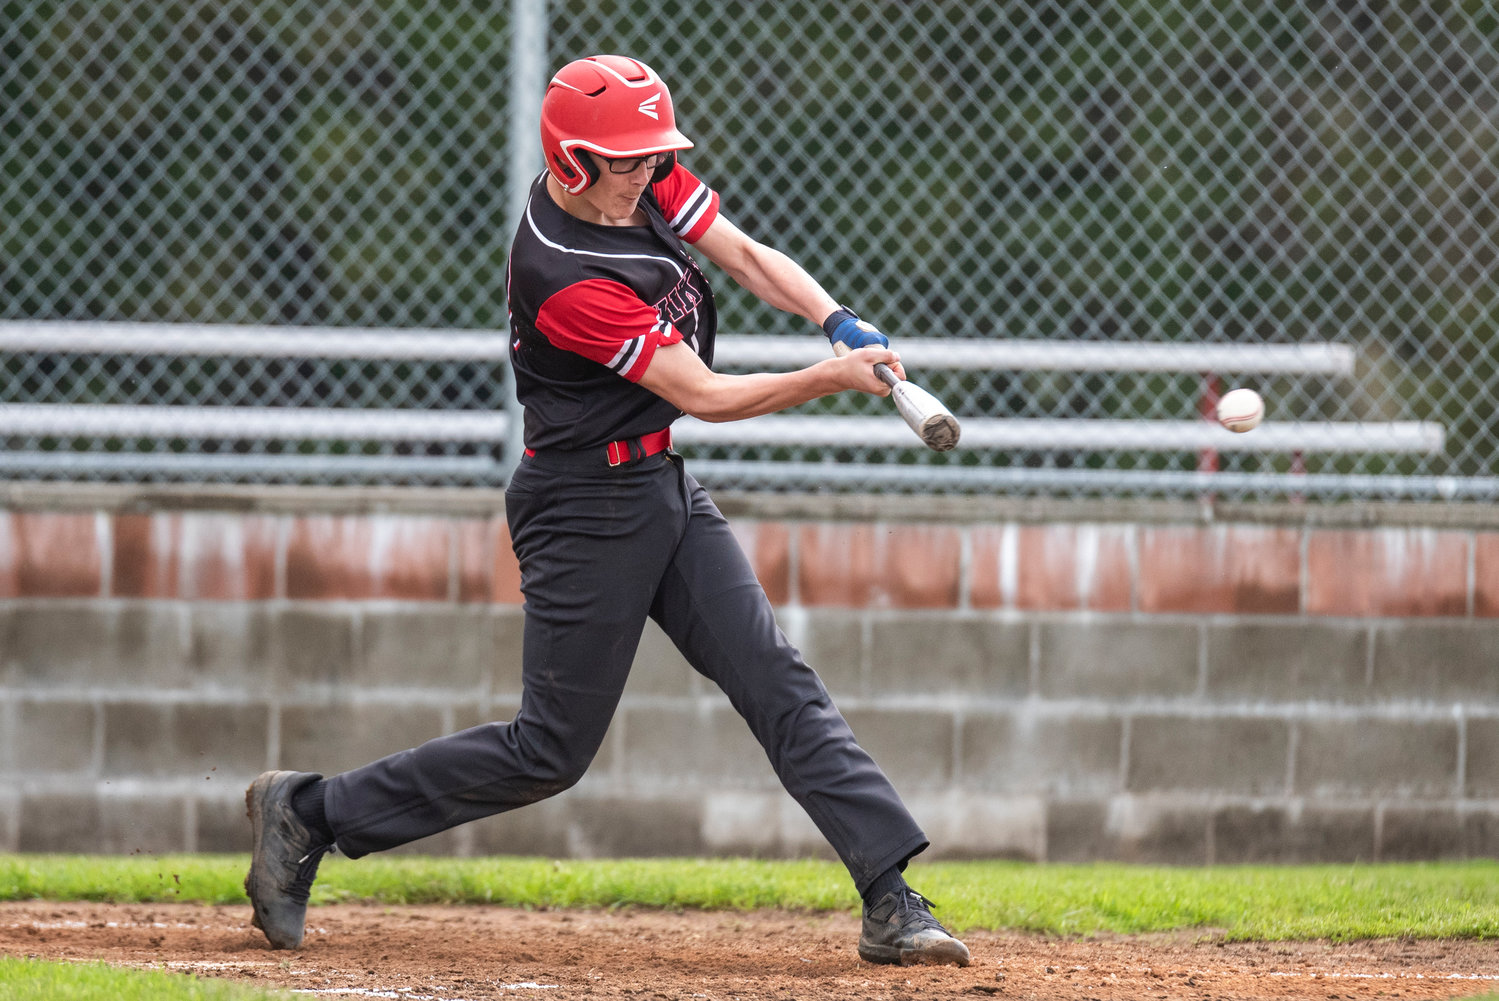 Mossyrock's Hunter Isom connects on a Lake Quinault pitch during a district playoff win at home on May 9.